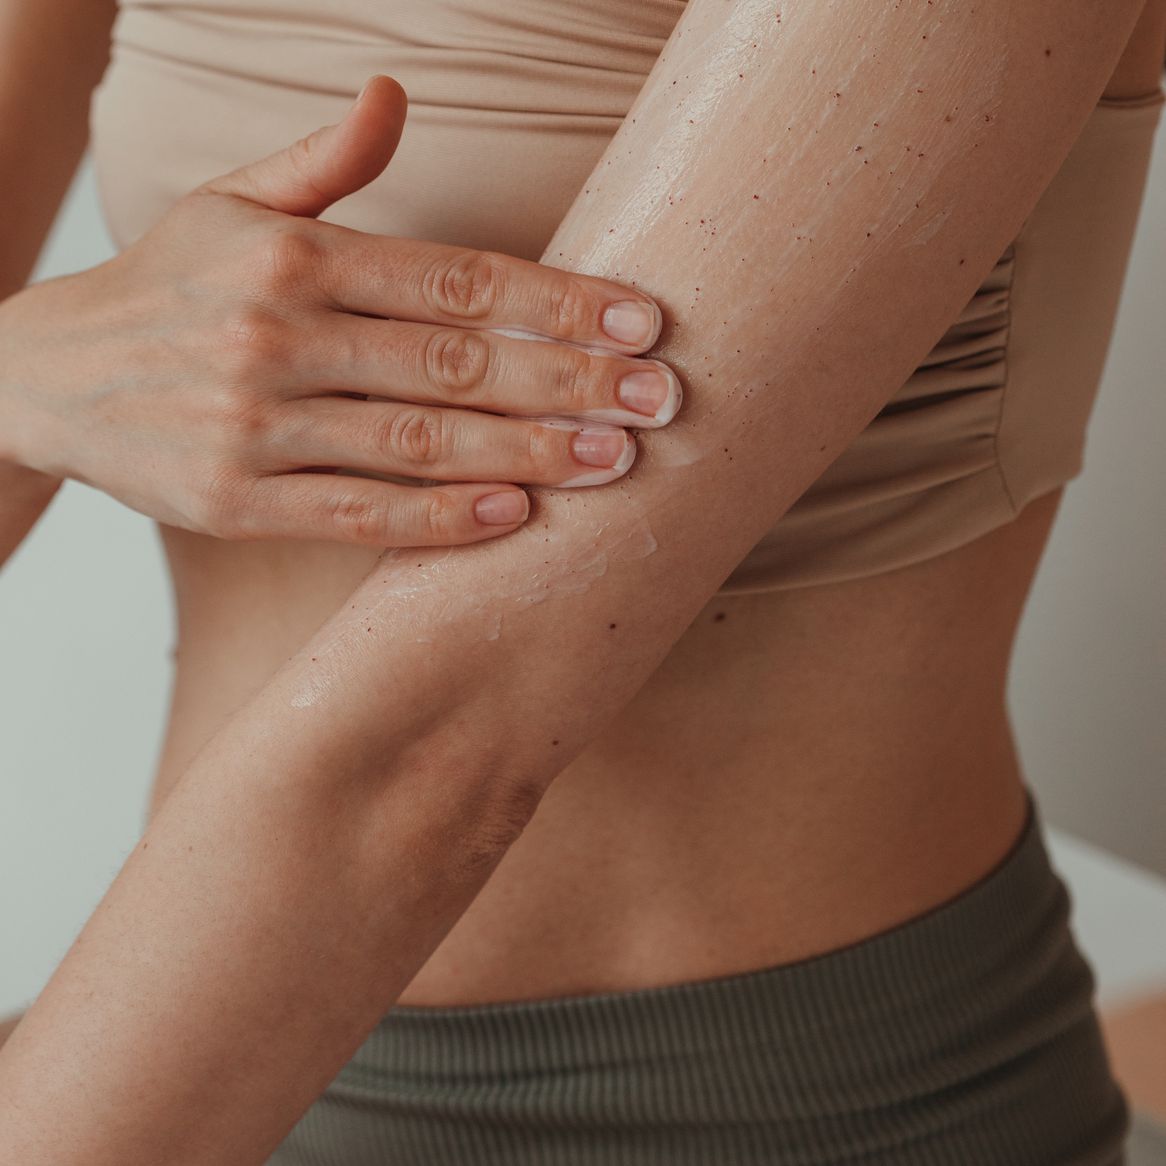 Sensitive Skin 101: Symptoms, Causes, and Treatments